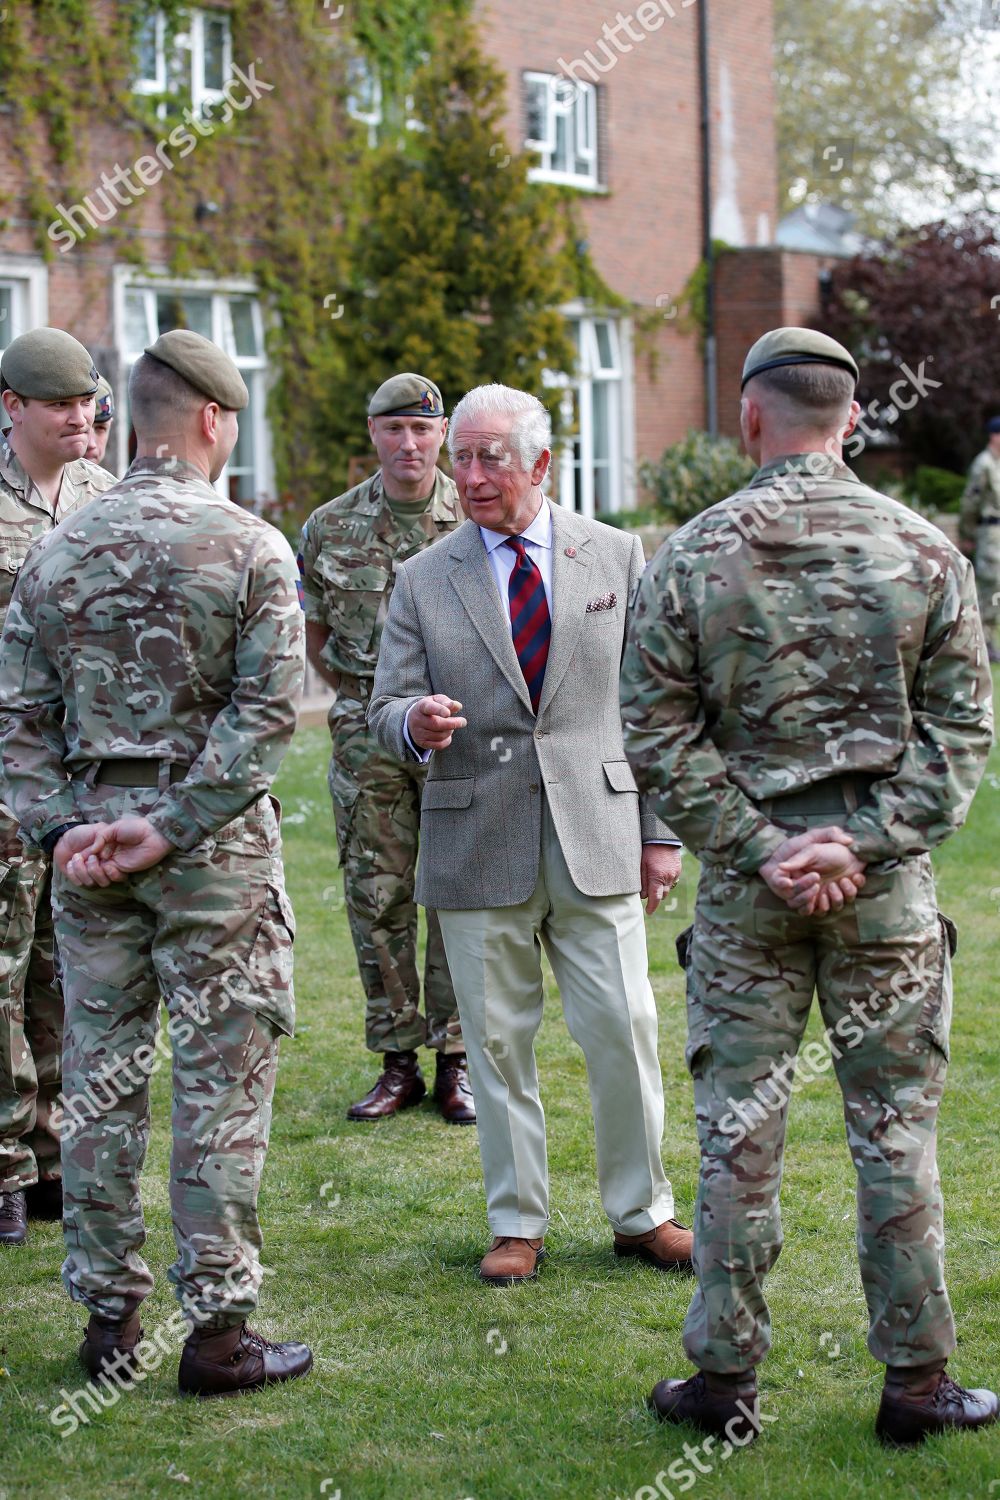 prince-charles-visits-members-of-the-welsh-guards-windsor-uk-shutterstock-editorial-11889775o.jpg